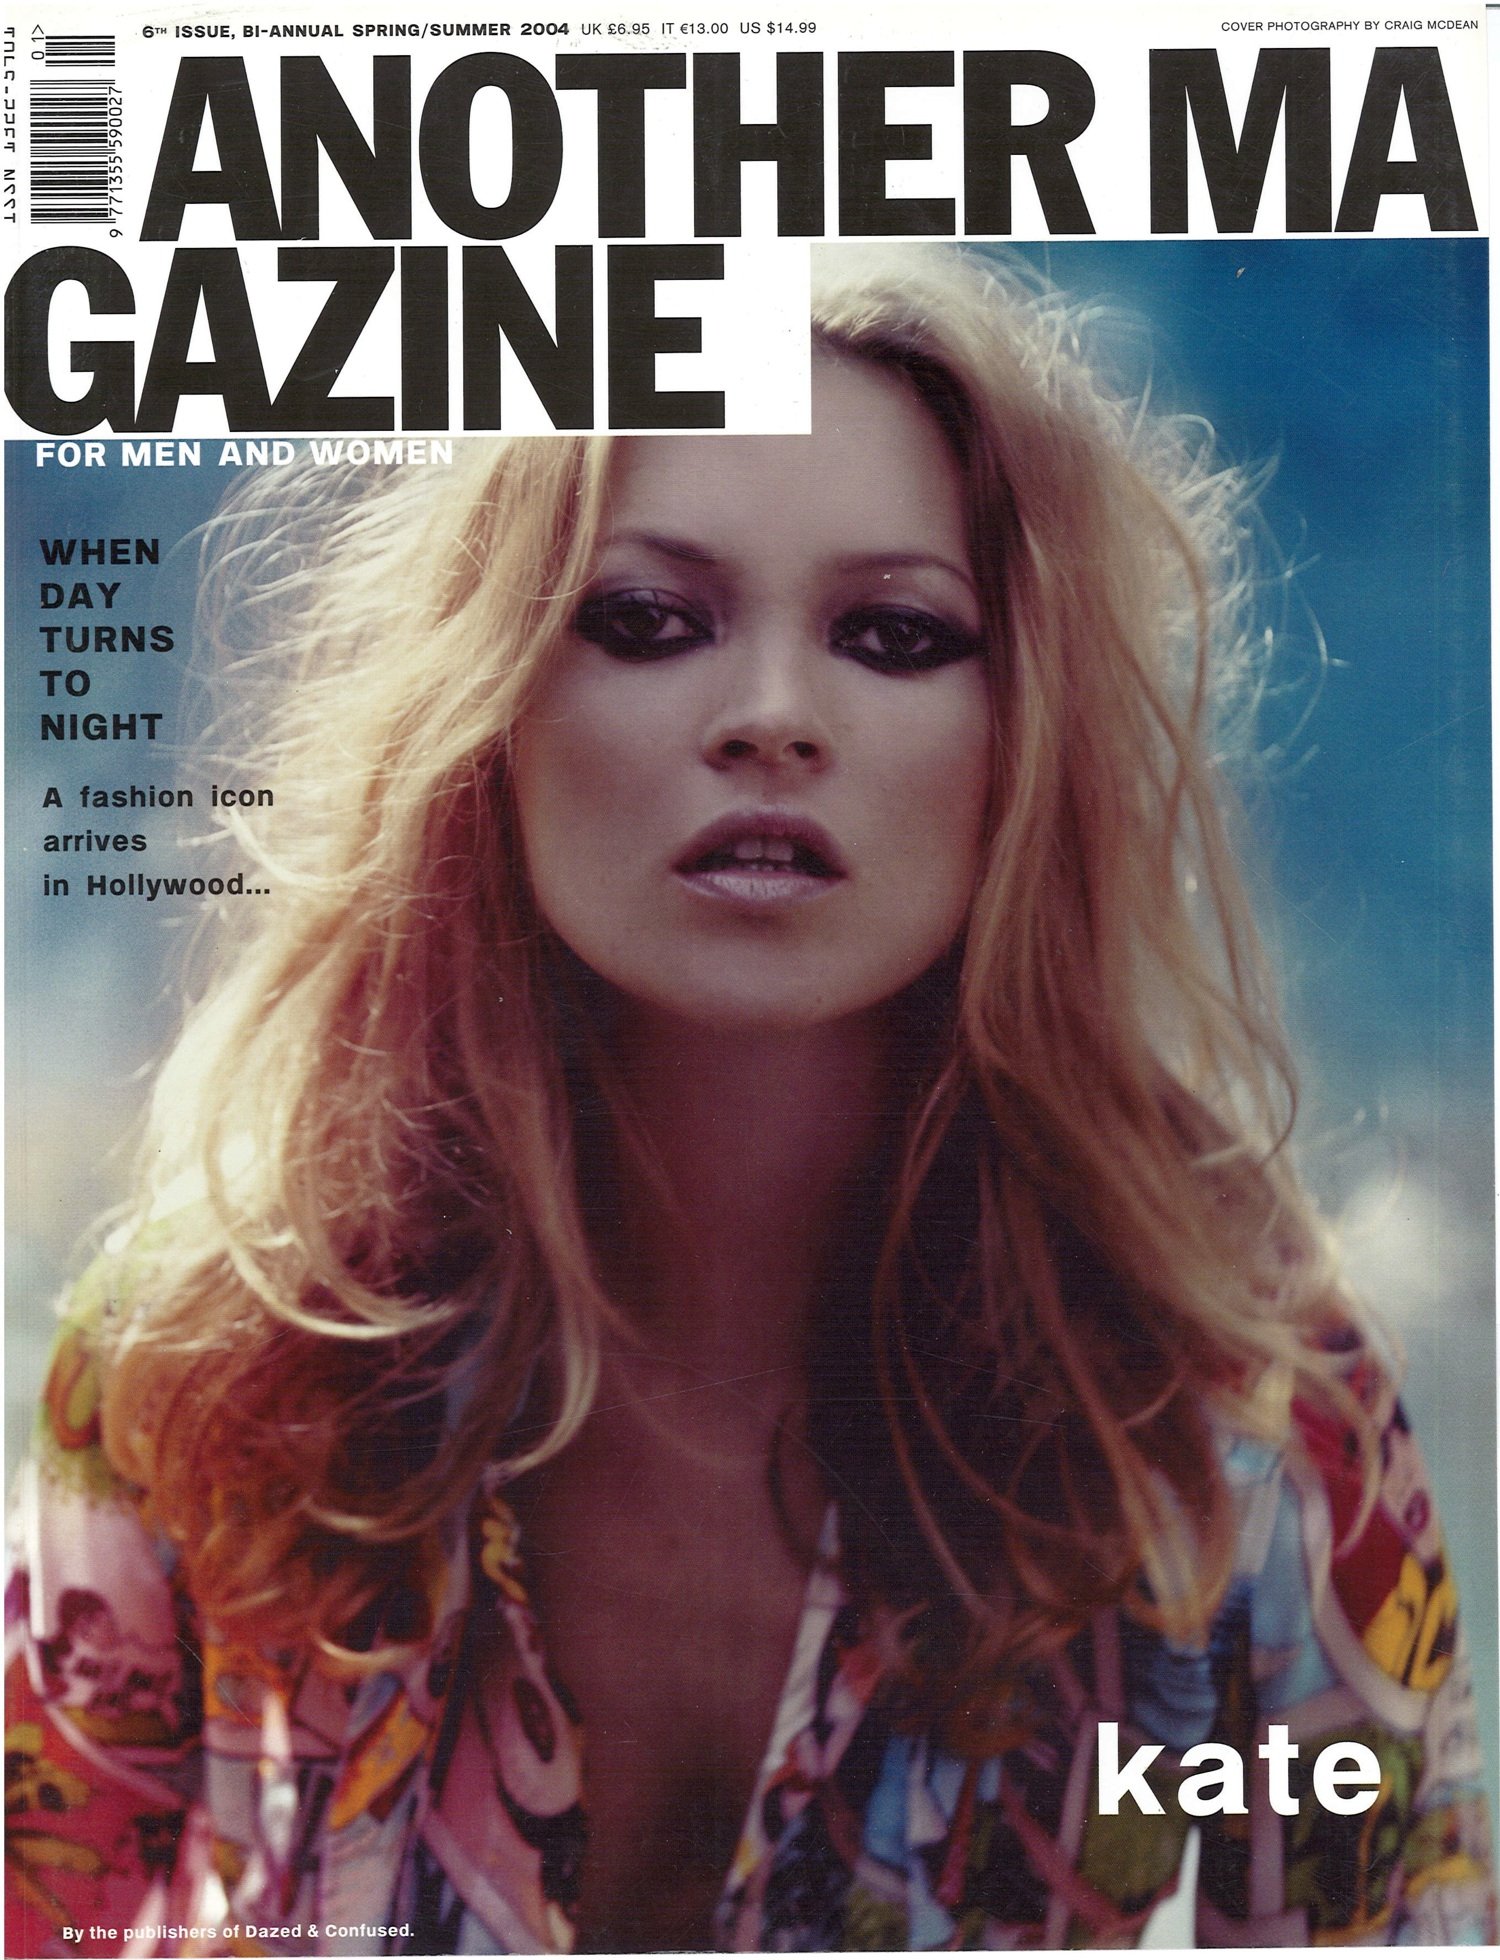 Kate-Moss-by-Craig-McDean-AnOther-Magazine-SS-2004-00007.jpeg